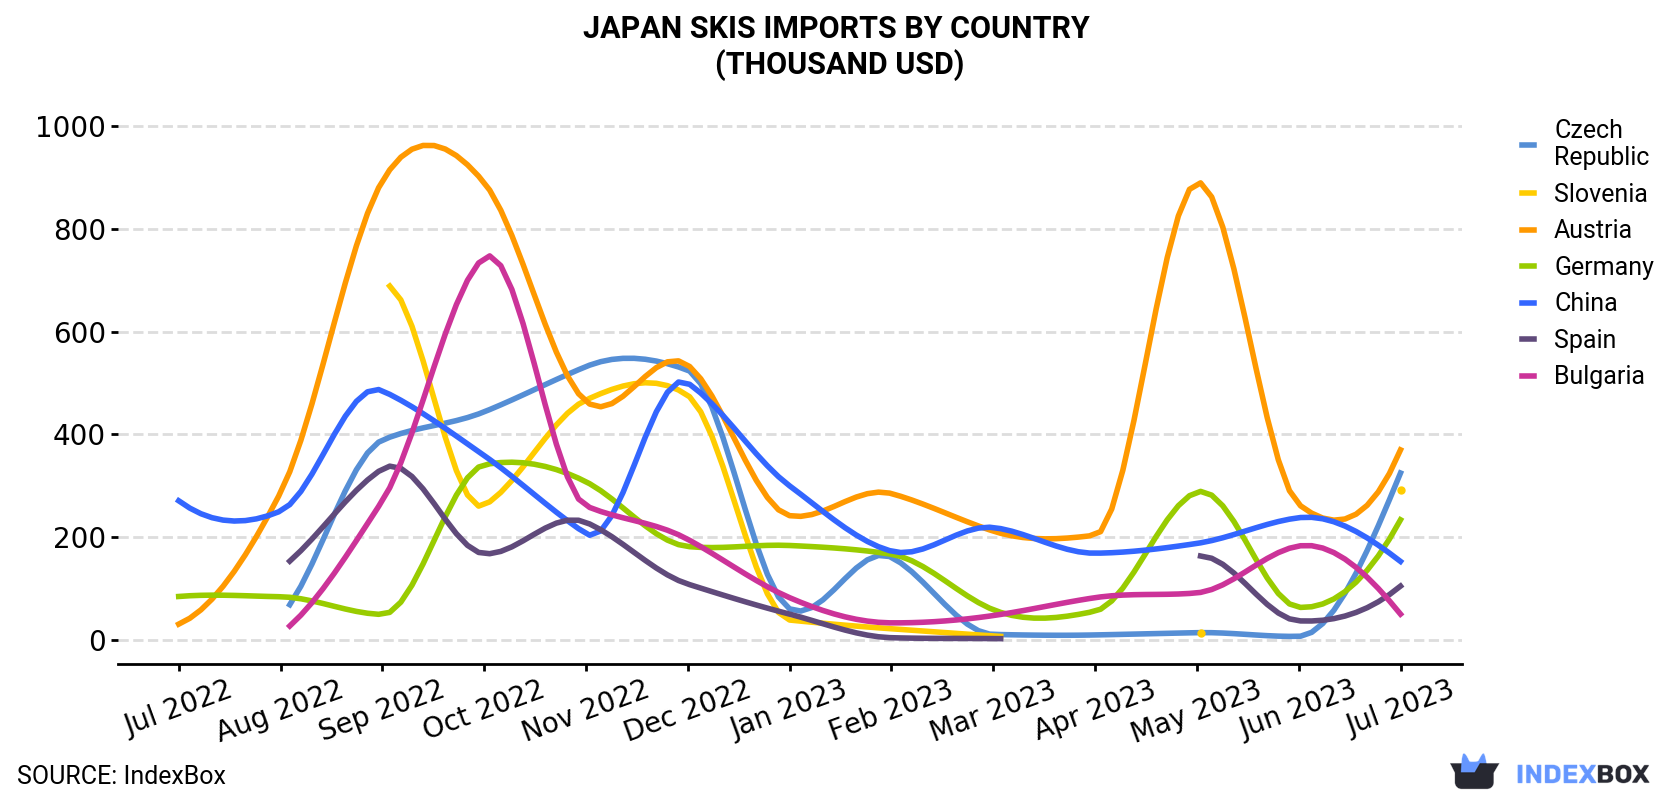 Japan Skis Imports By Country (Thousand USD)